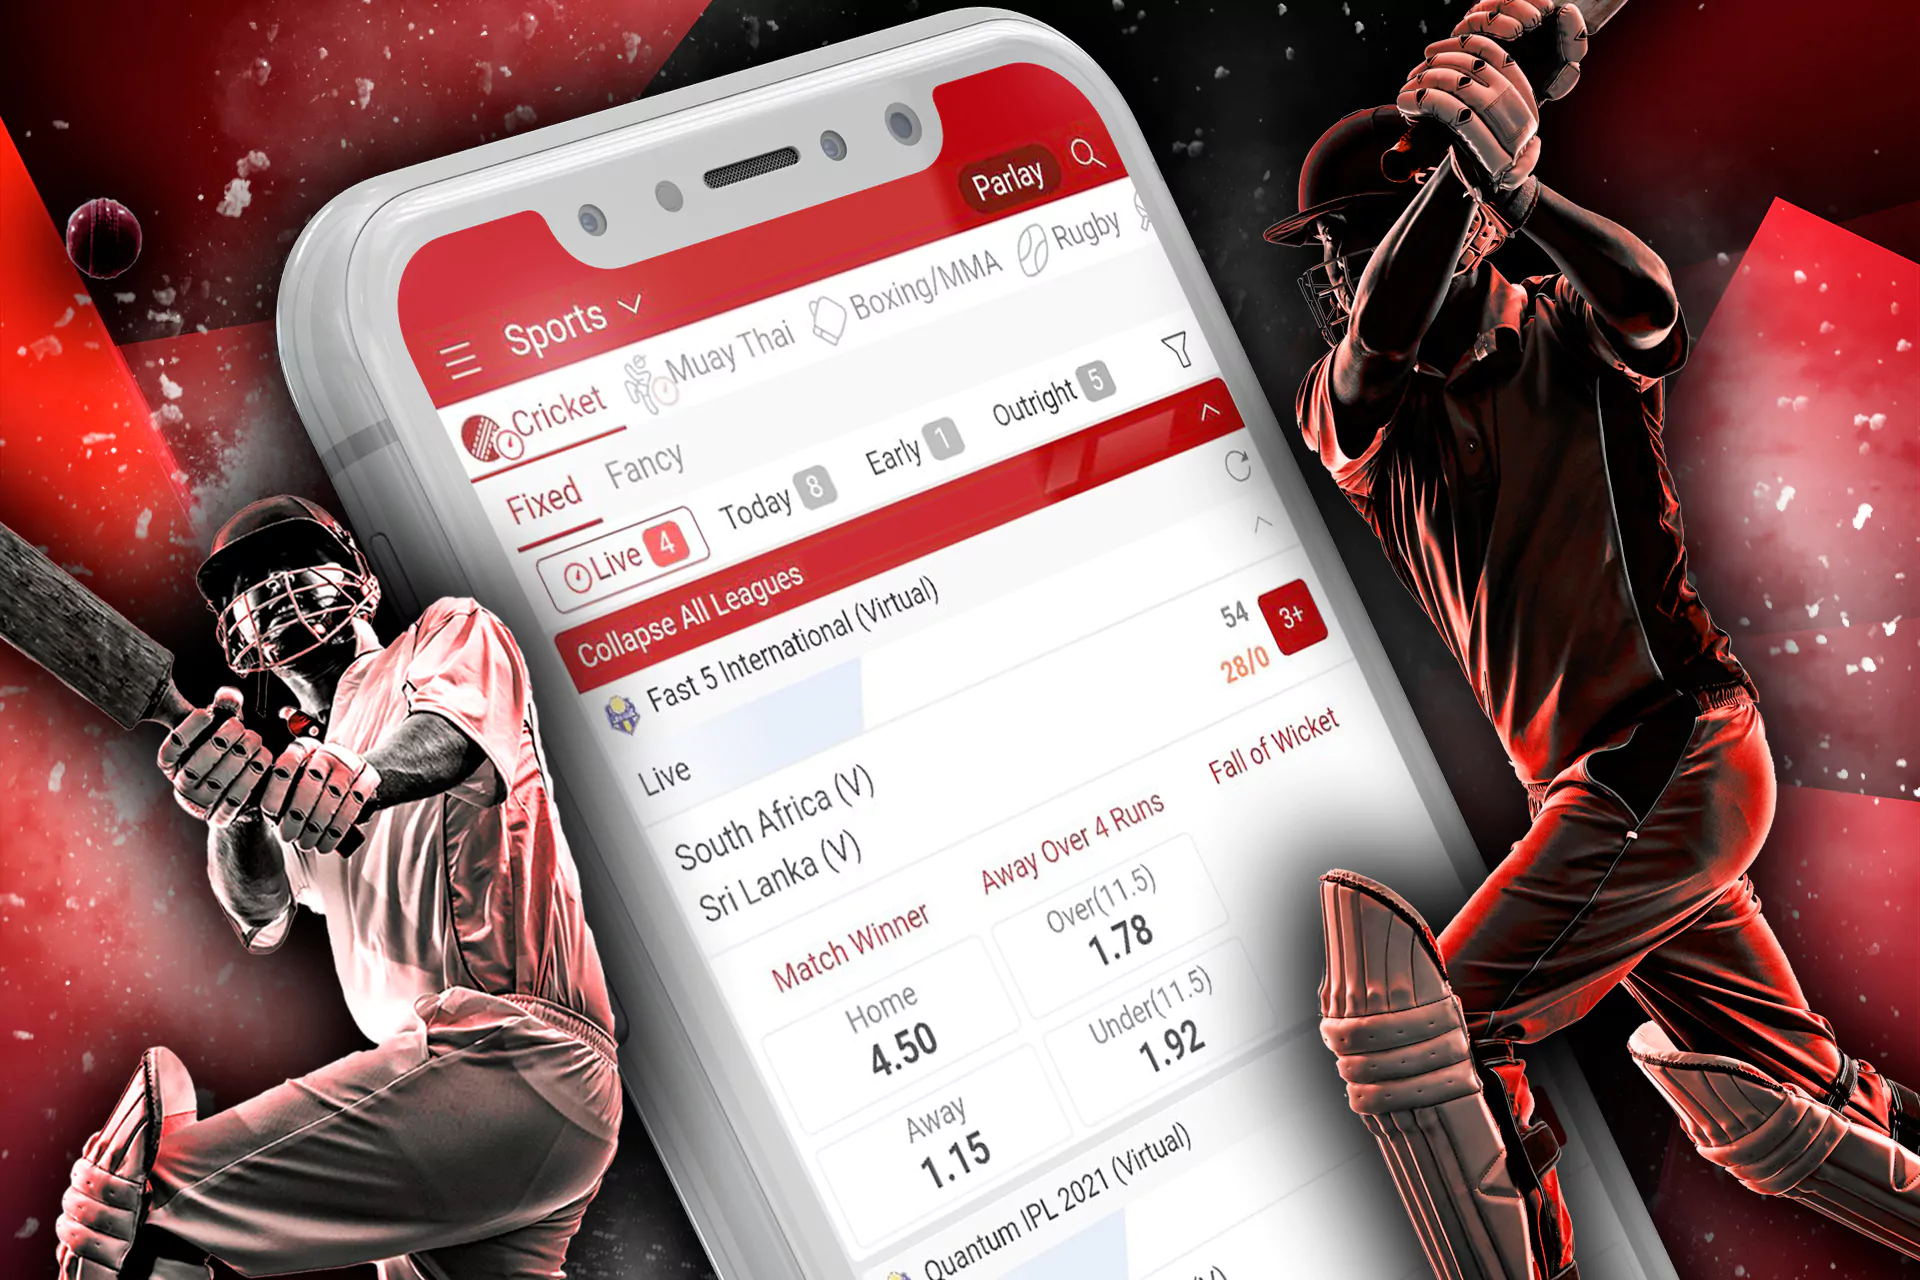 Choose cricket match and odds, and place your bet.